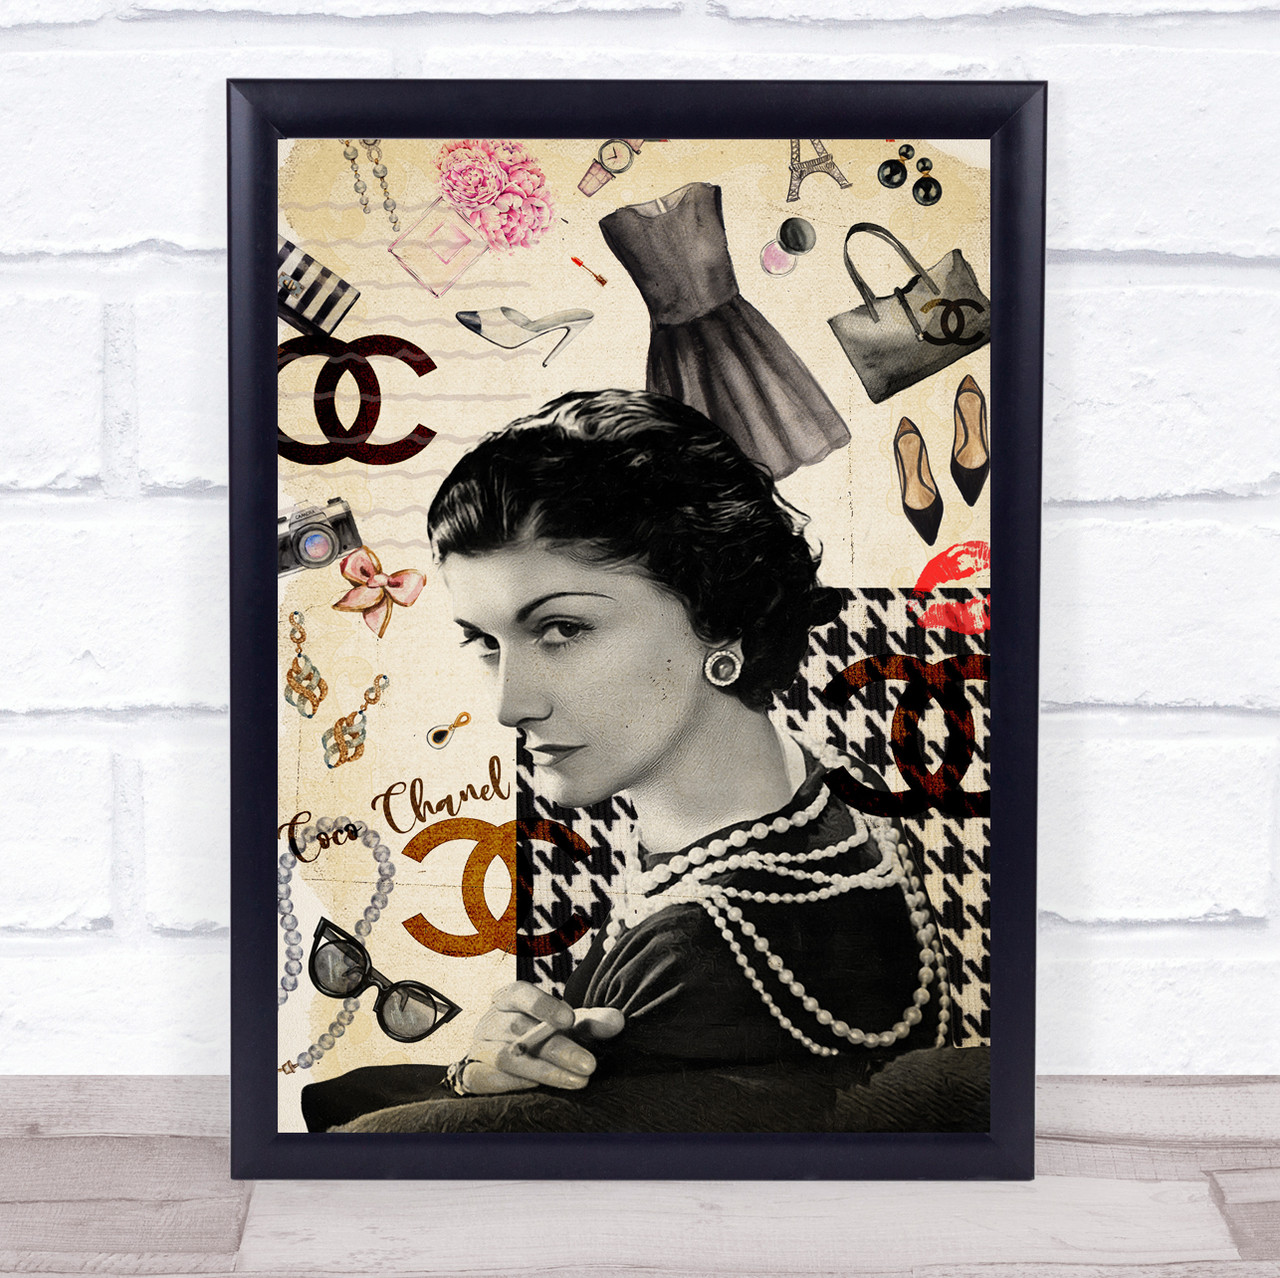 Chanel Vintage Photography Wall Art: Prints, Paintings & Posters